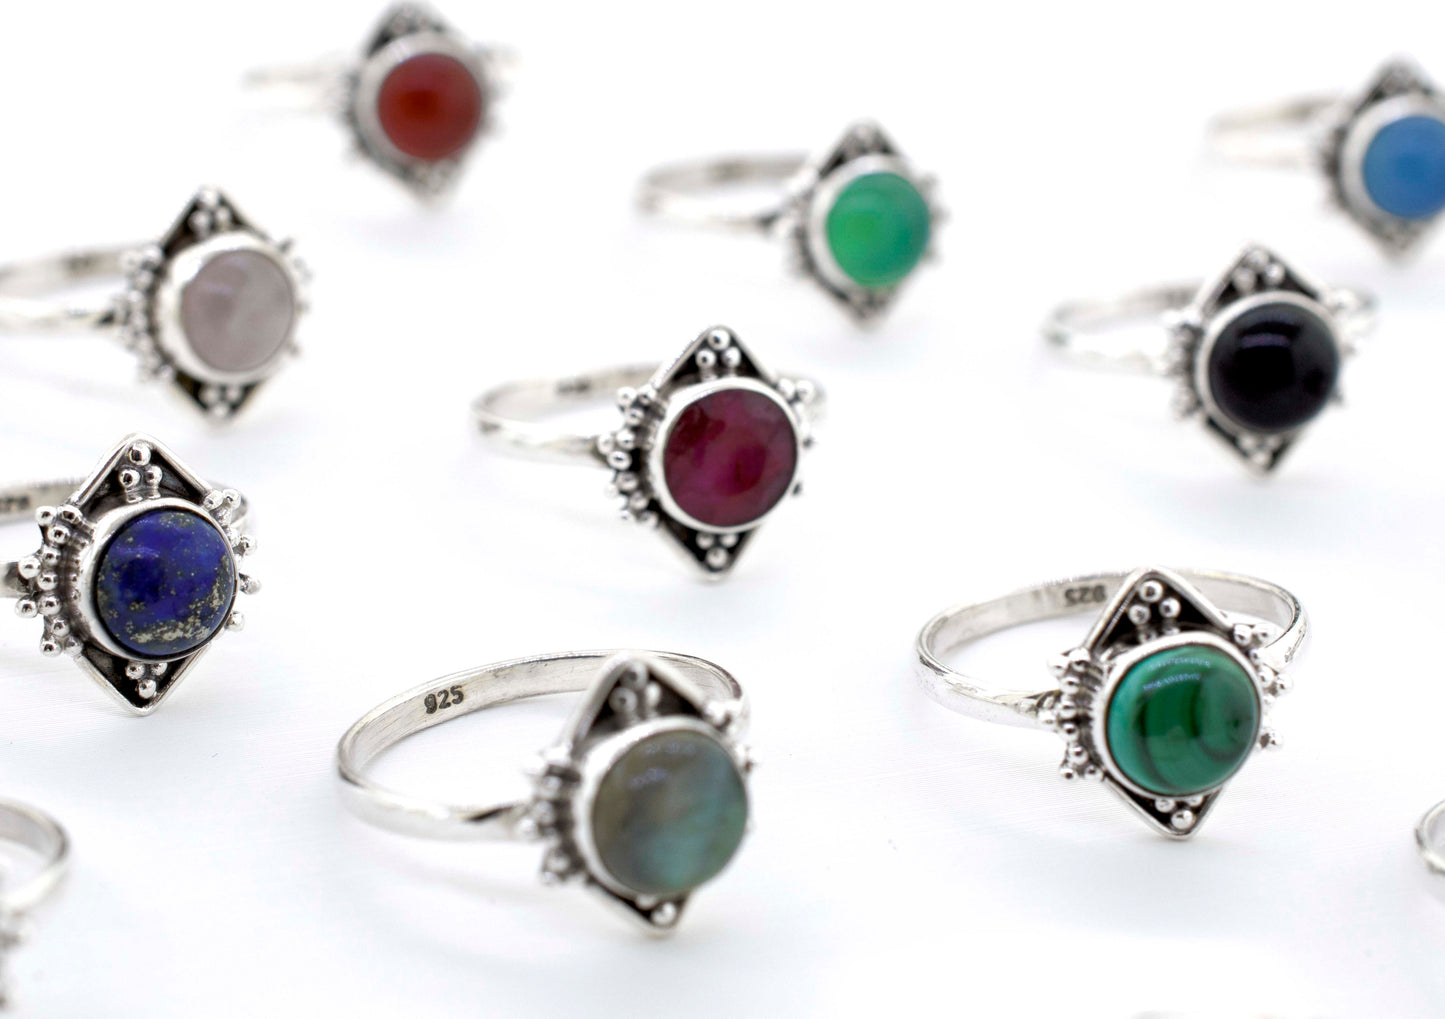 A group of Round Gemstone Rings With Oxidized Diamond Shape Pattern on a white background.